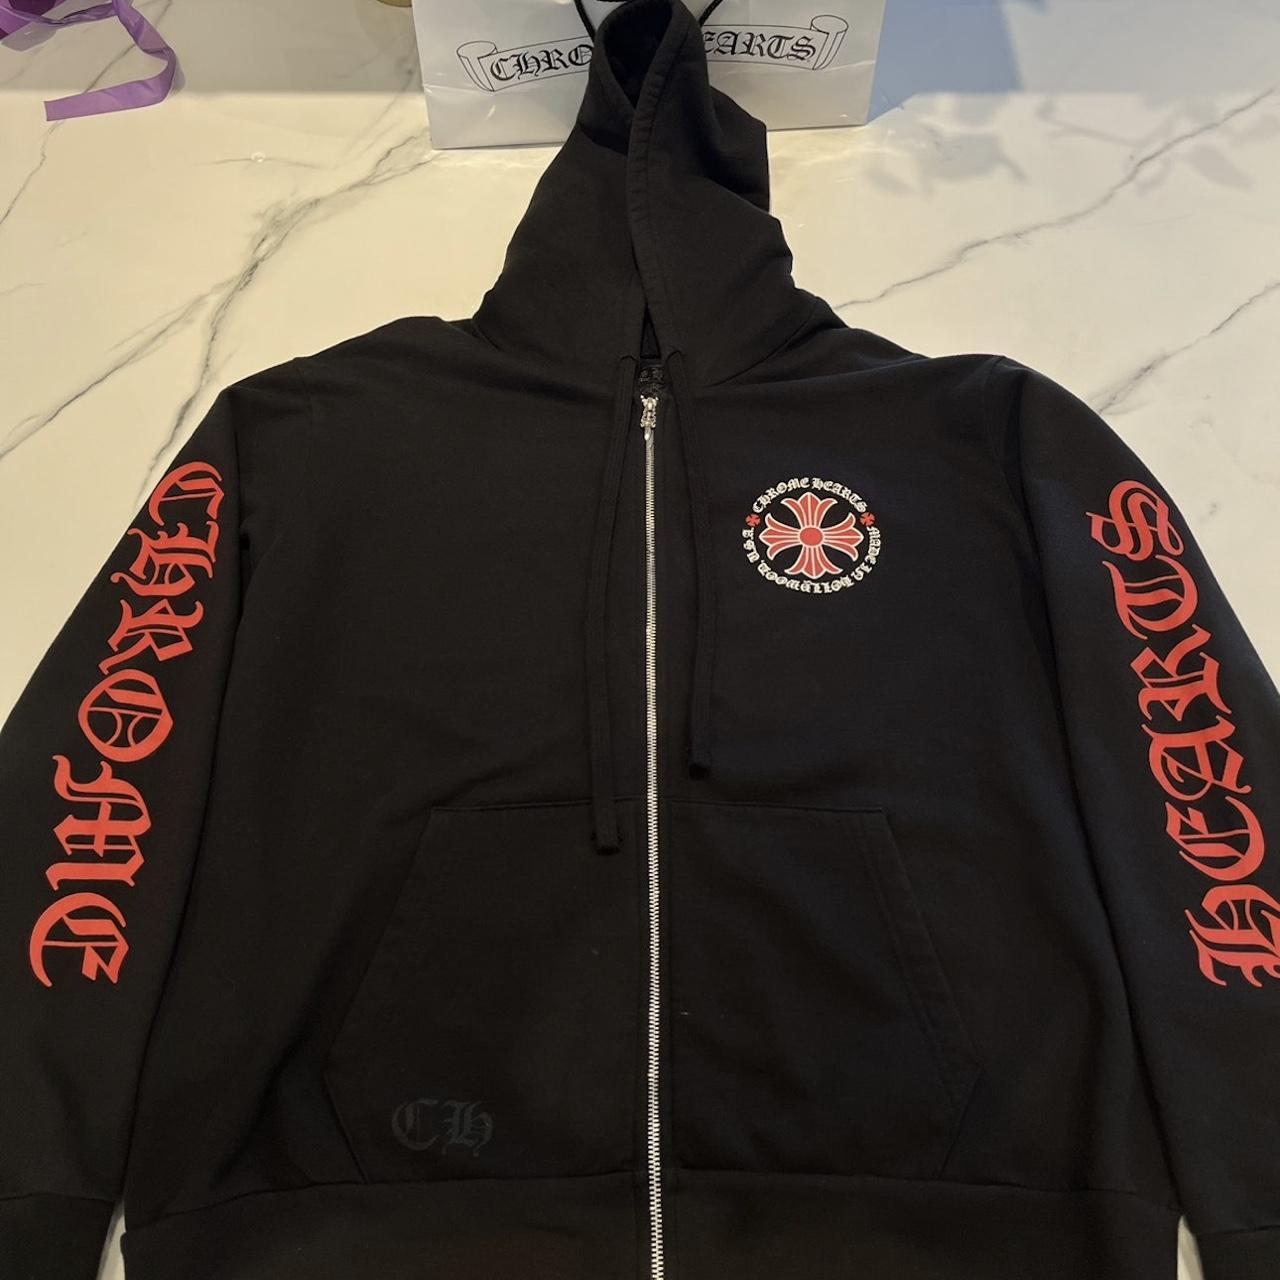 100% authentic chrome heart black and red zip up hoodie - Depop